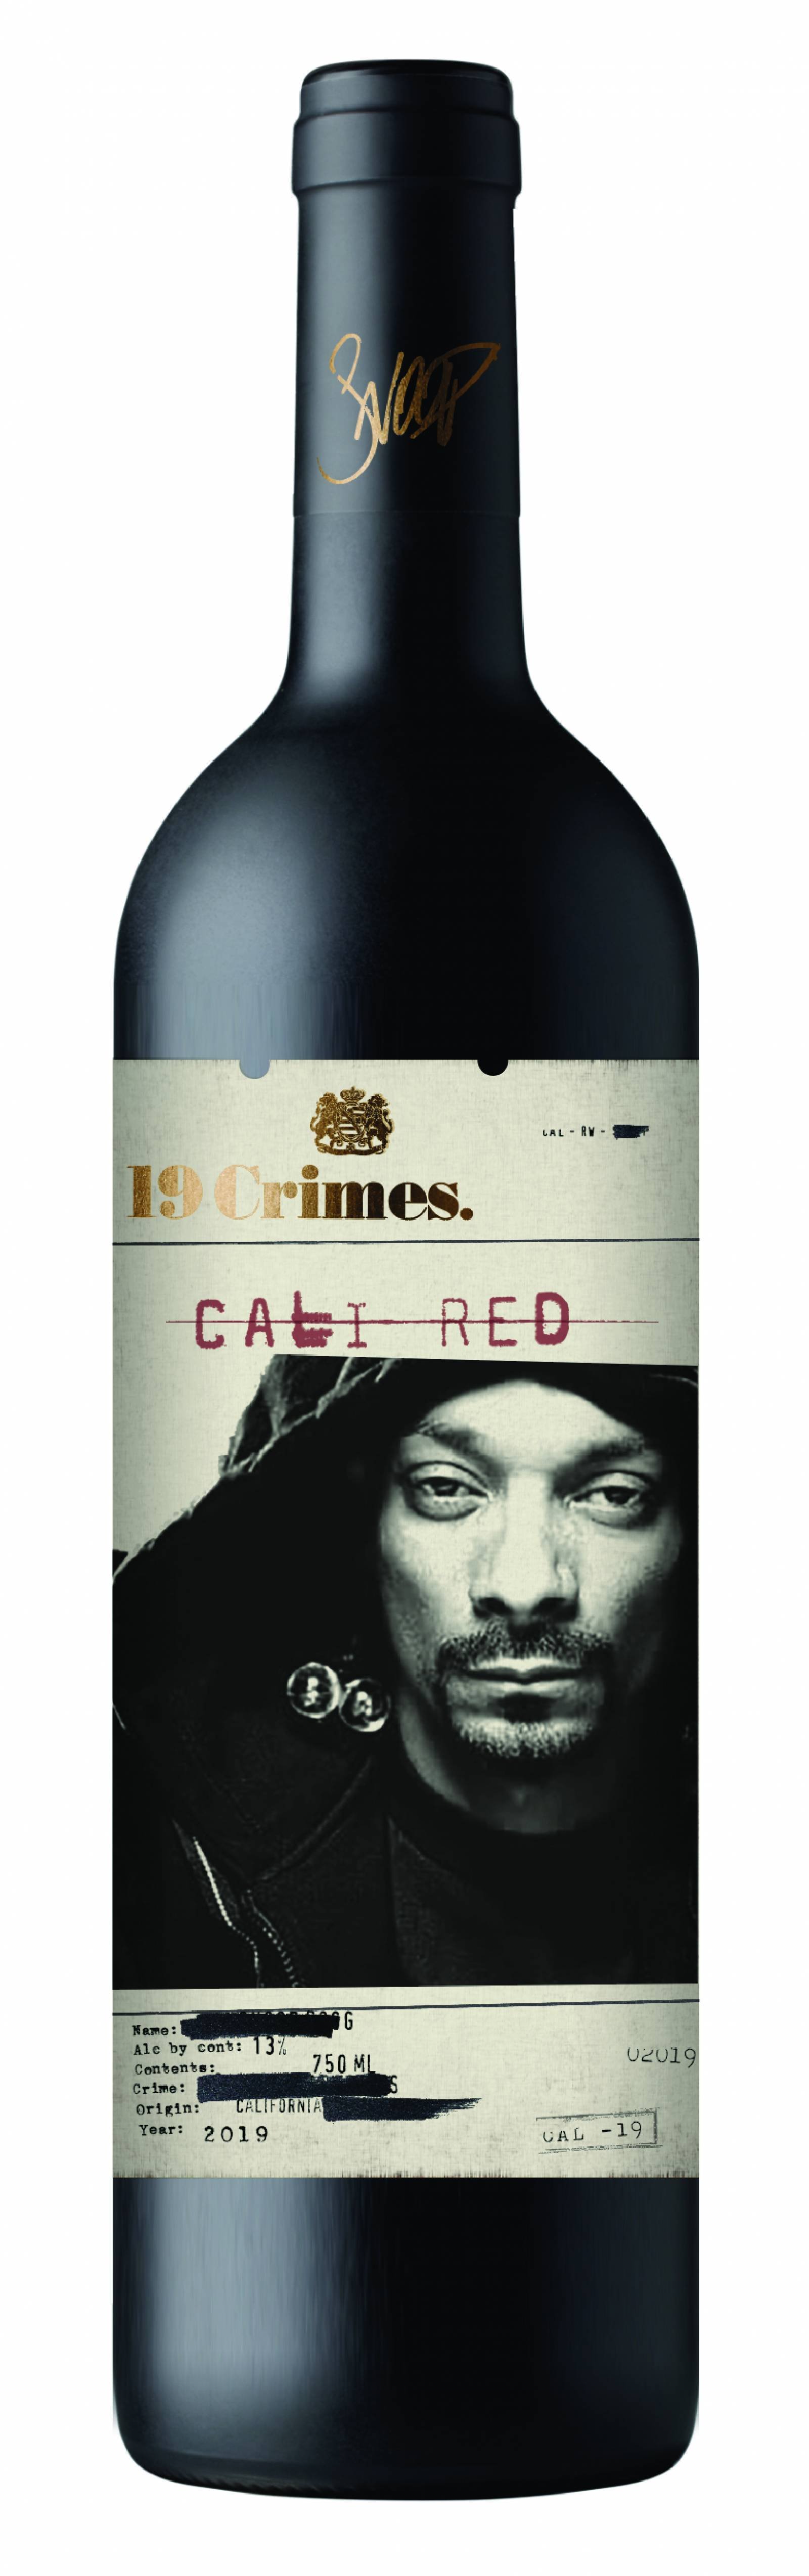 Snoop Dogg Partners With Australian Winery For 'Snoop Cali Red' Wine